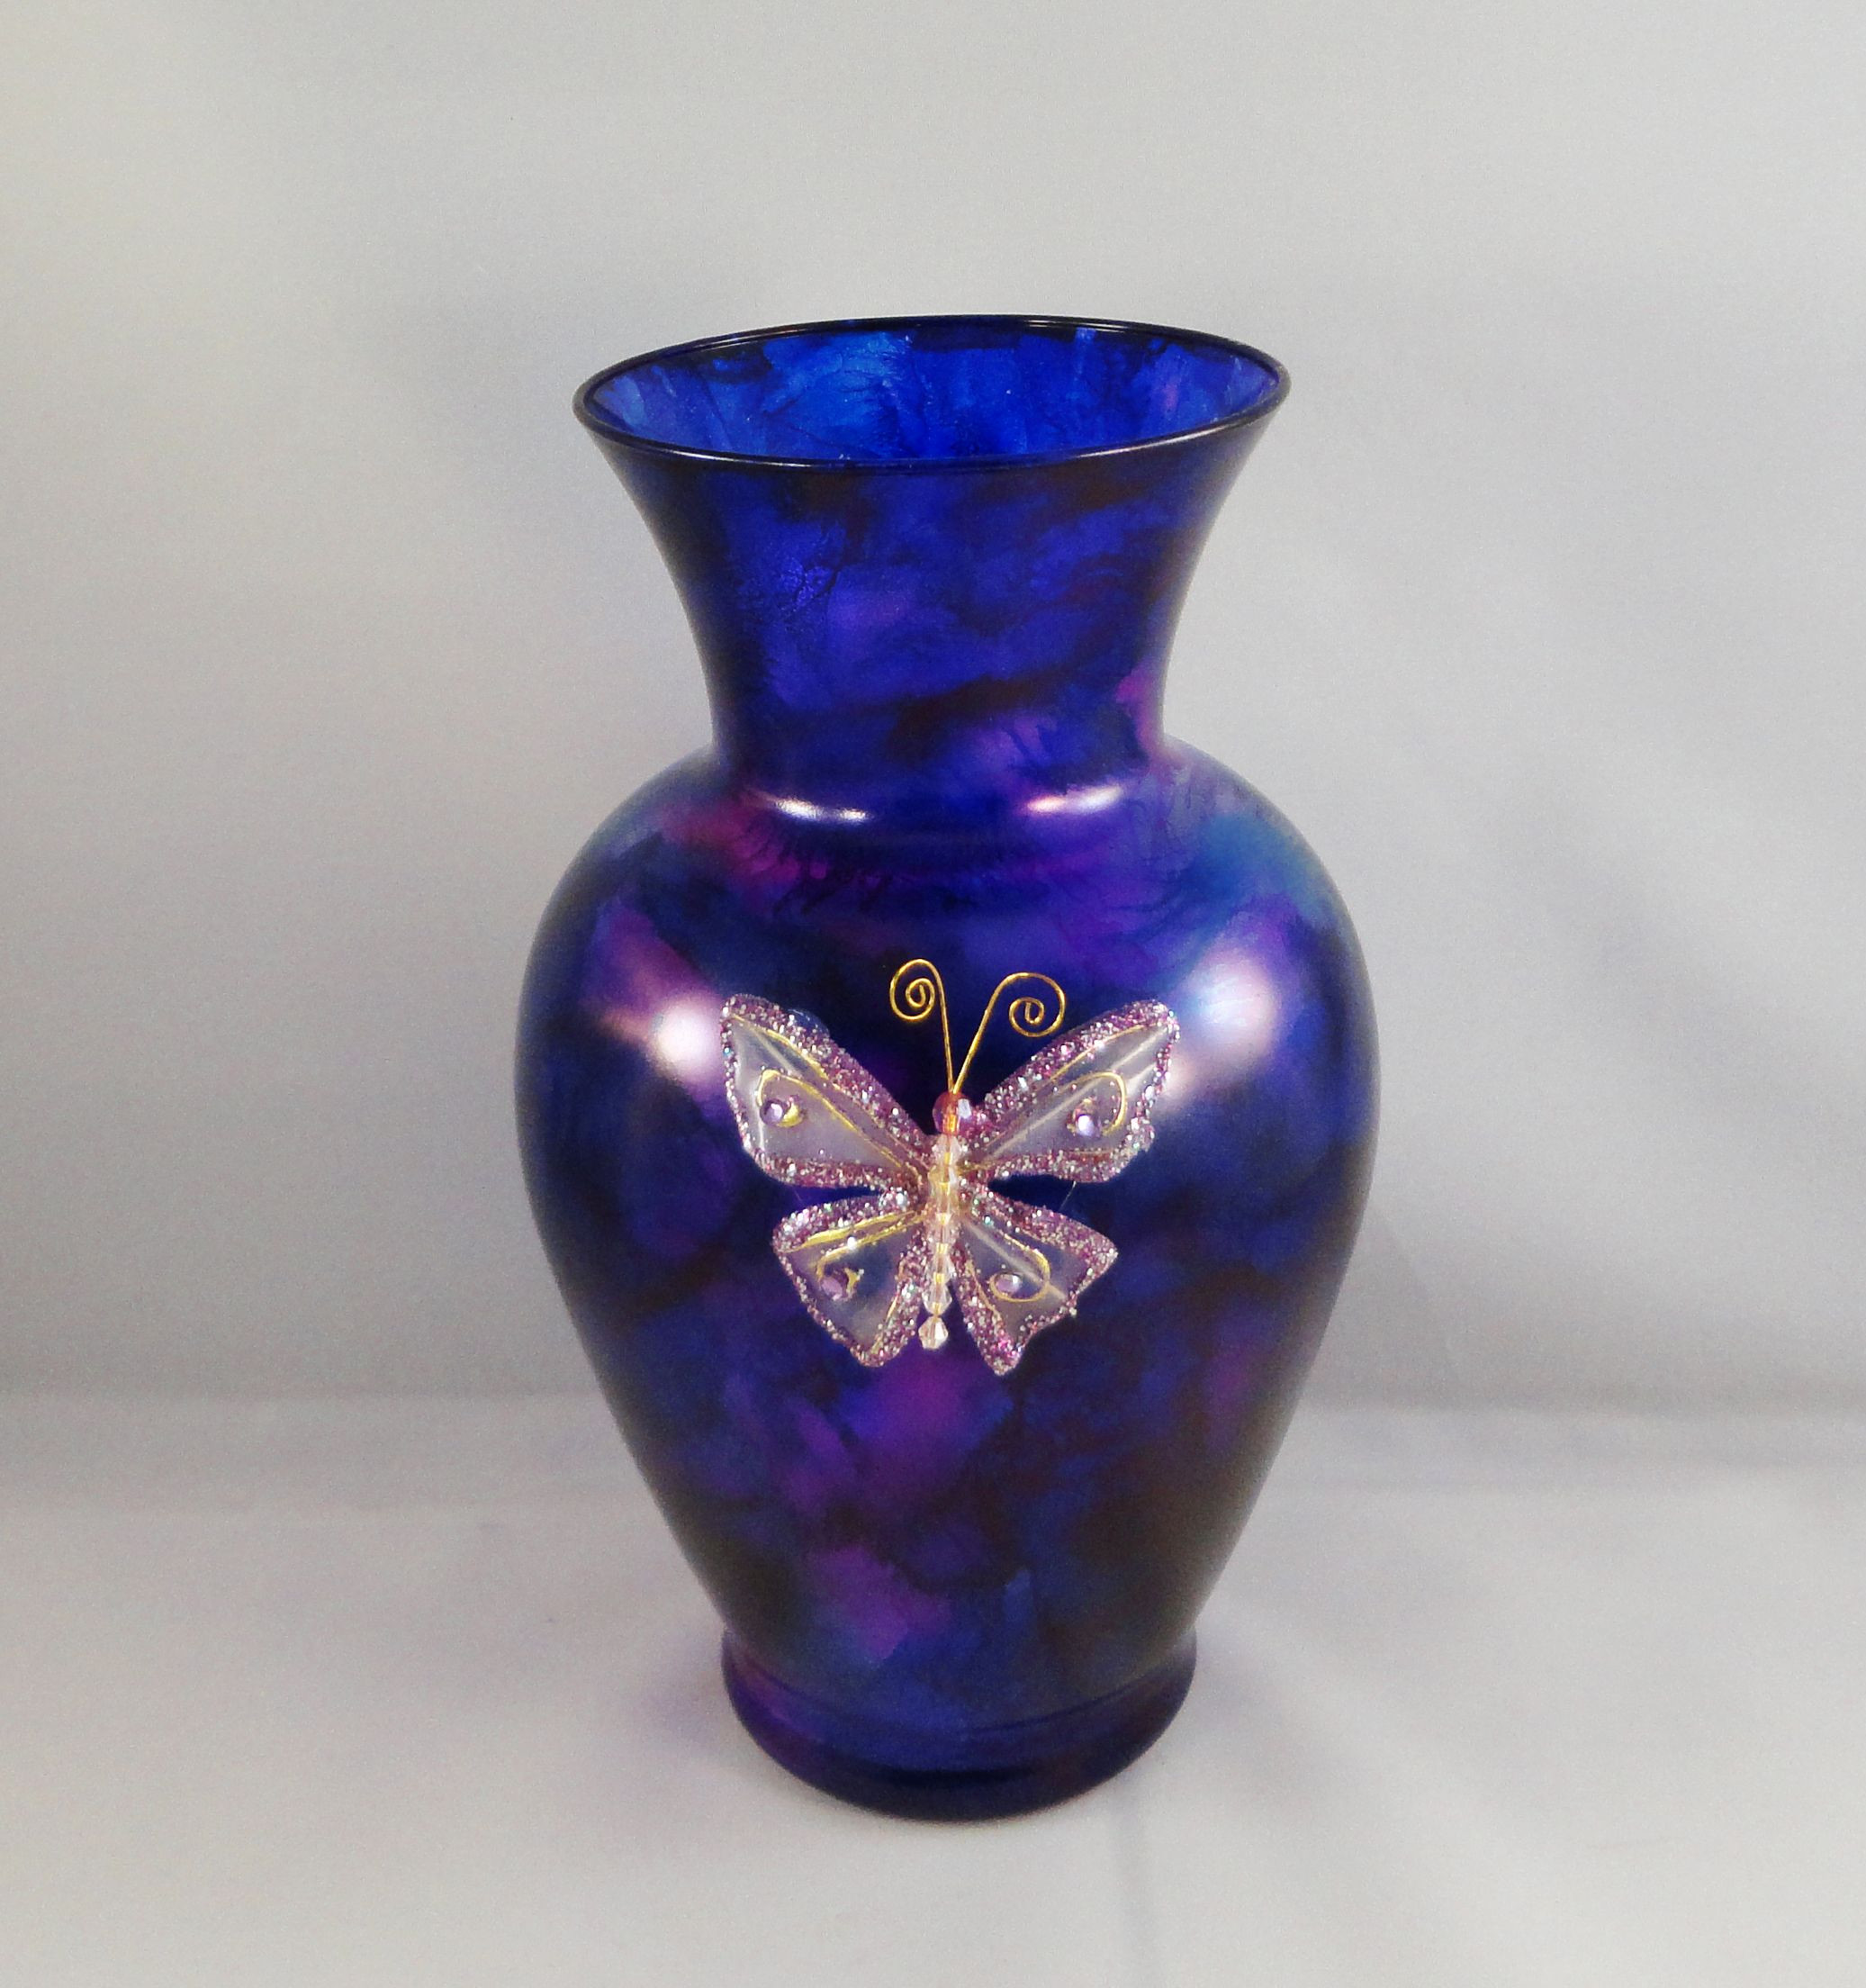 16 Wonderful Purple Ceramic Vase 2024 free download purple ceramic vase of clear glass vase re imagined using alcohol inks glass reimagined intended for clear glass vase re imagined using alcohol inks